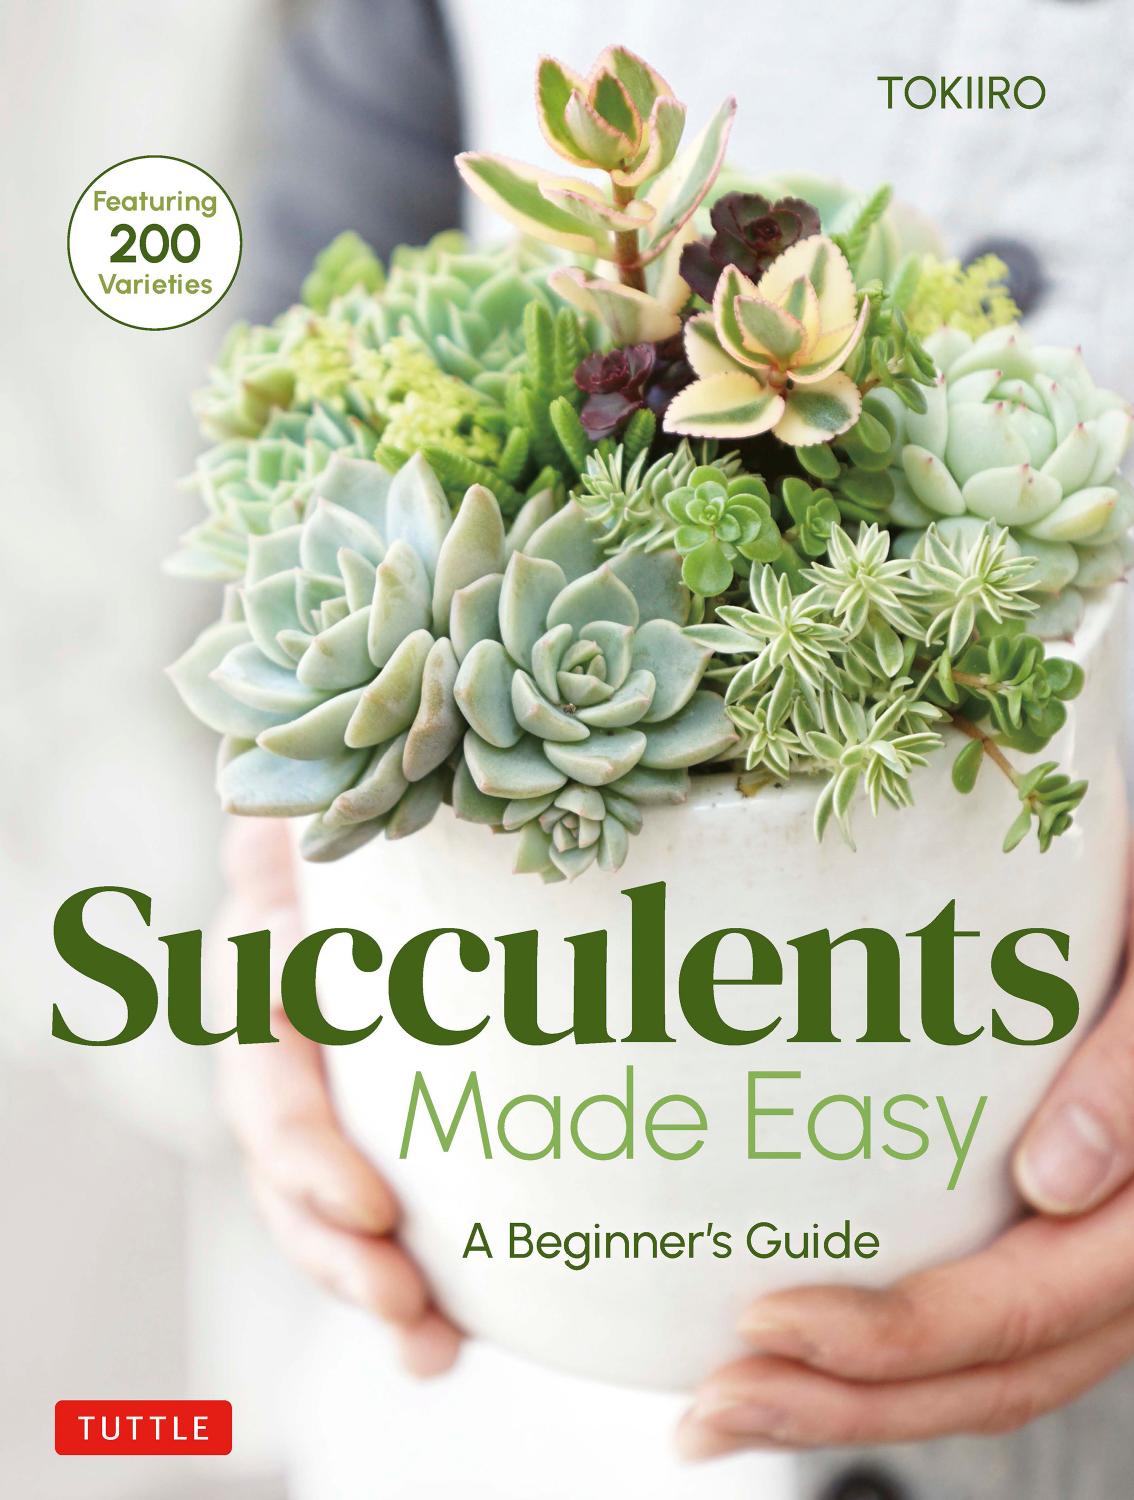 Succulents Made Easy: a Beginner's Guide (Featuring 200 Varieties) by Yoshinobu Kondo